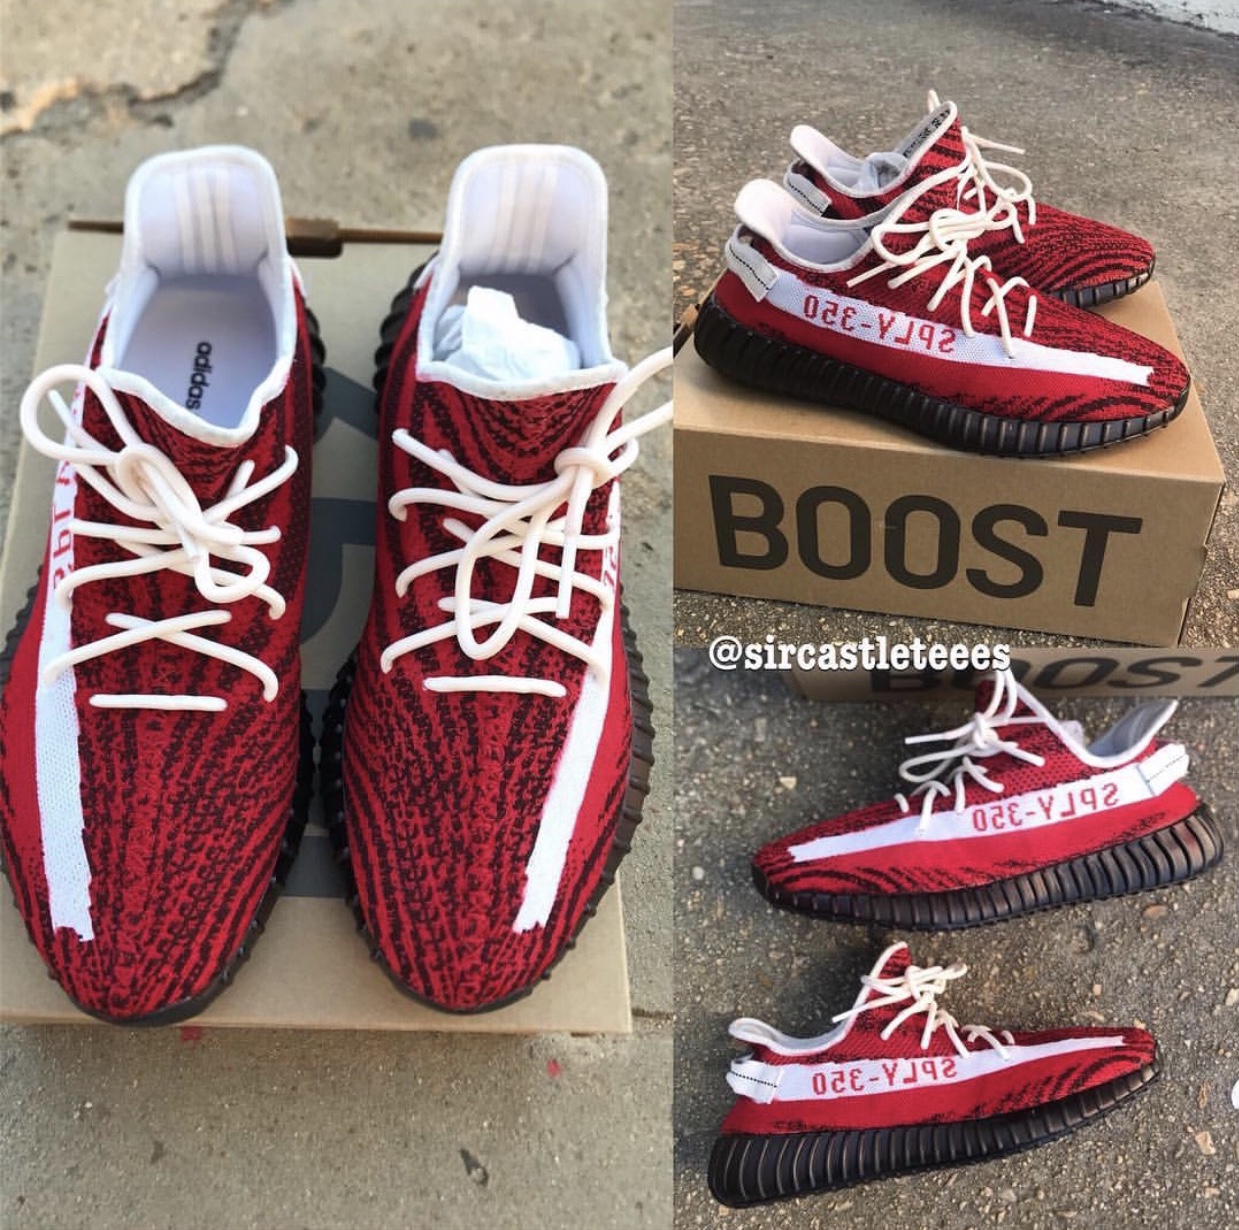 all red yeezys